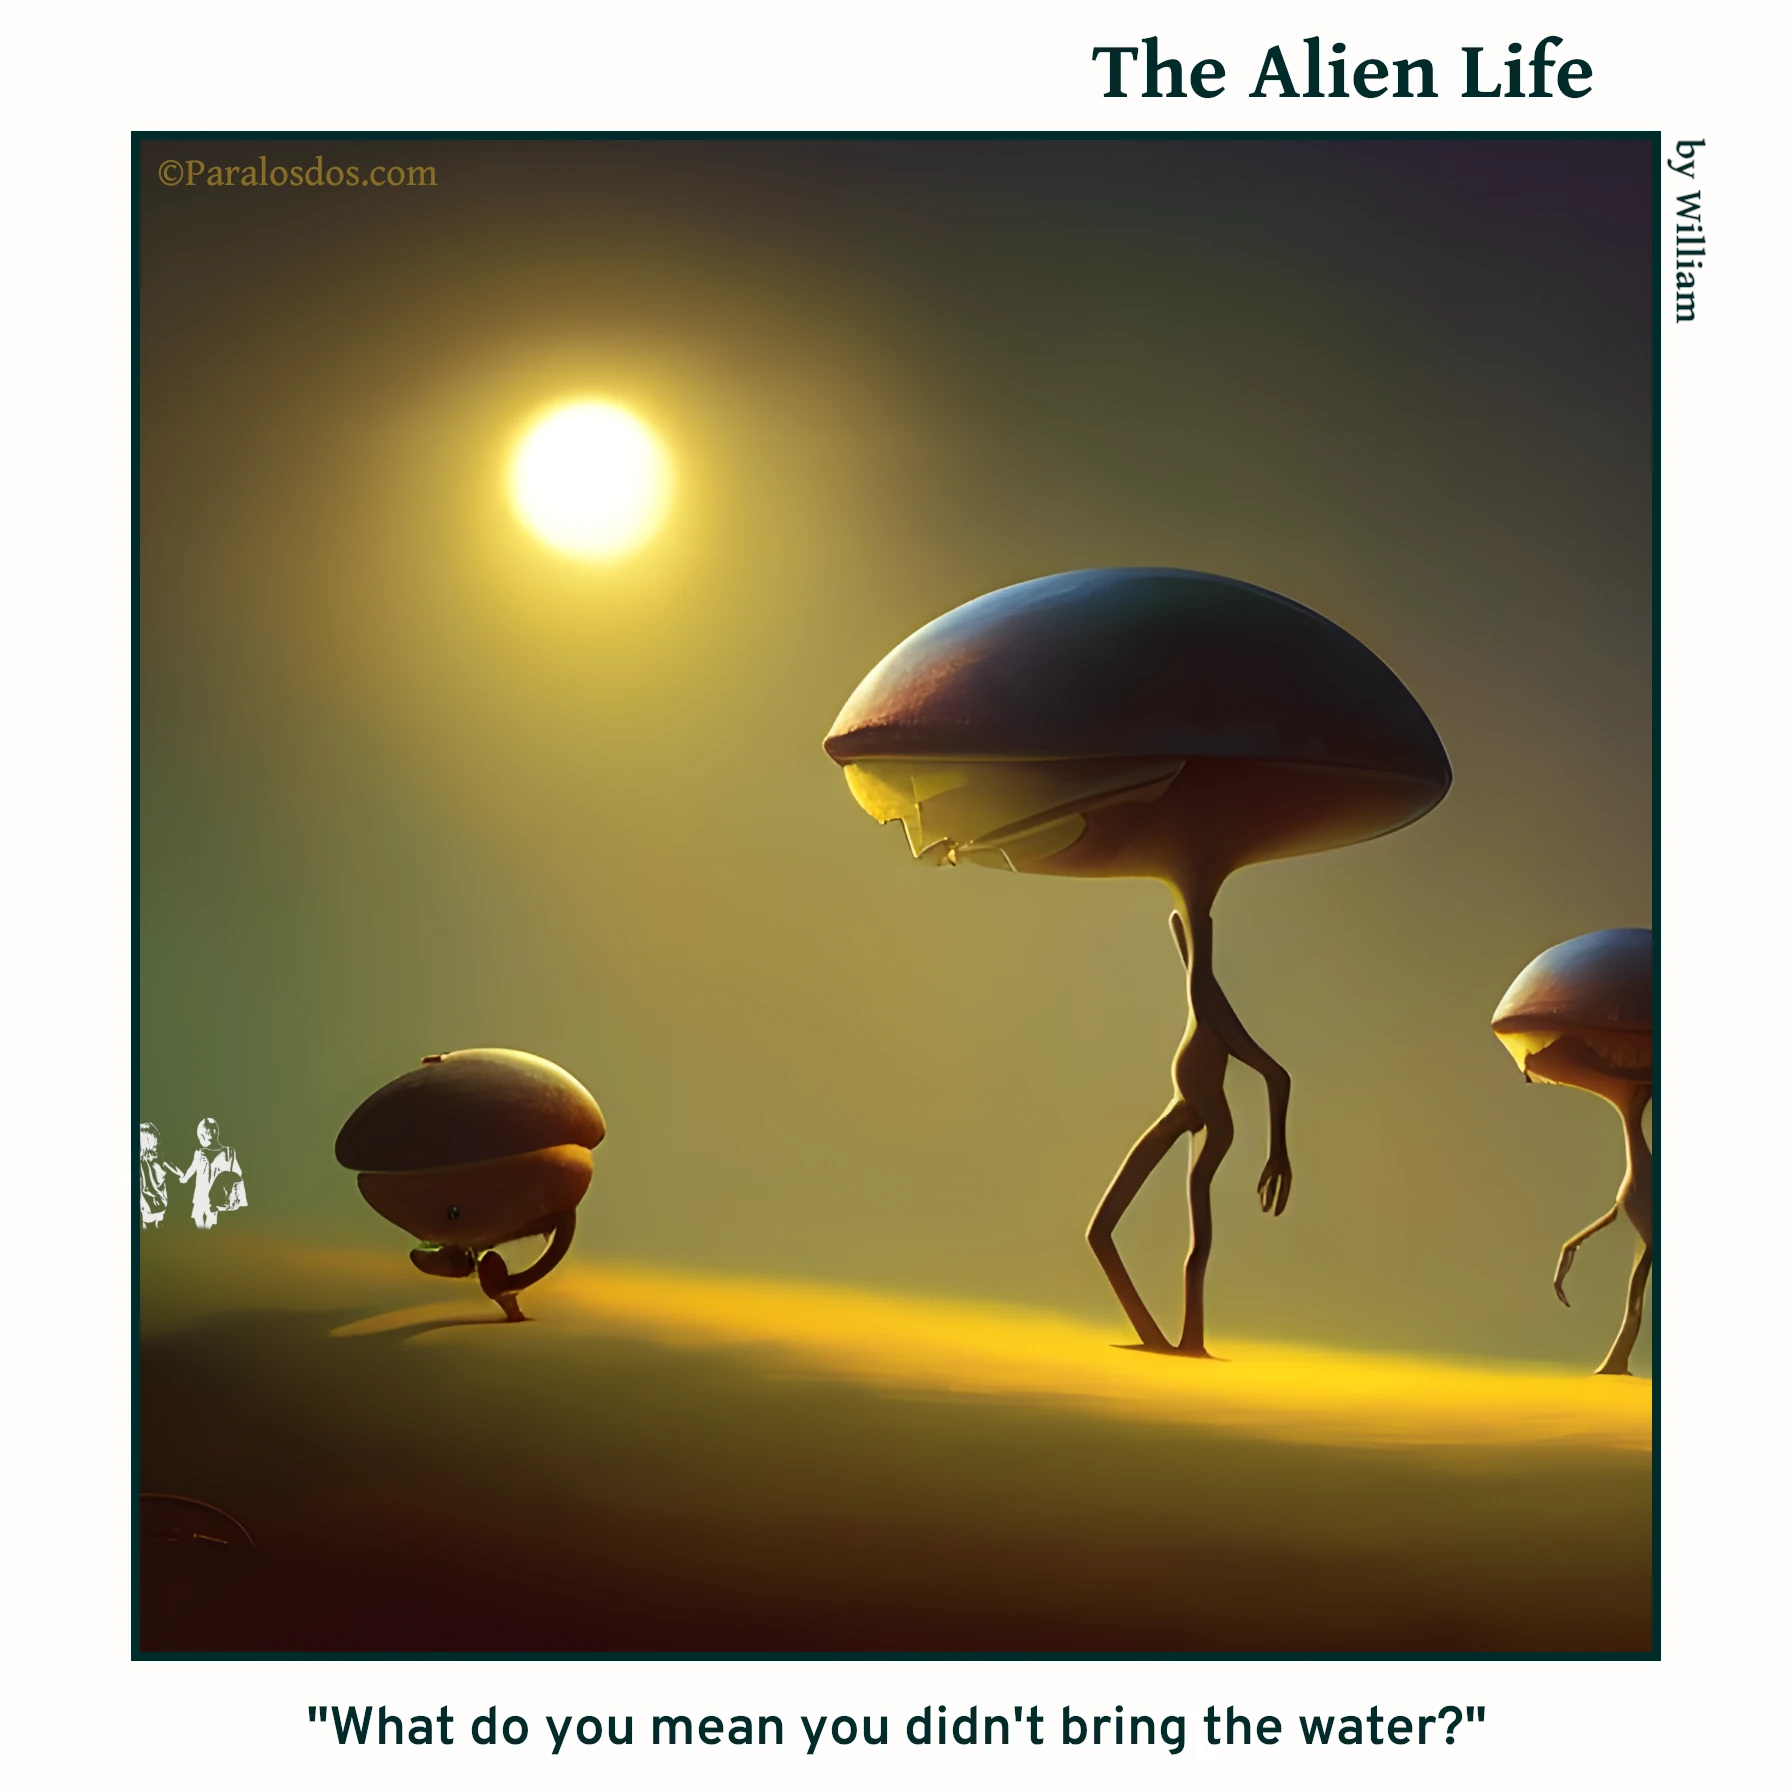 The Alien Life, one panel Comic. Three aliens are trudging through the dessert. The caption reads: "What do you mean you didn't bring the water?"